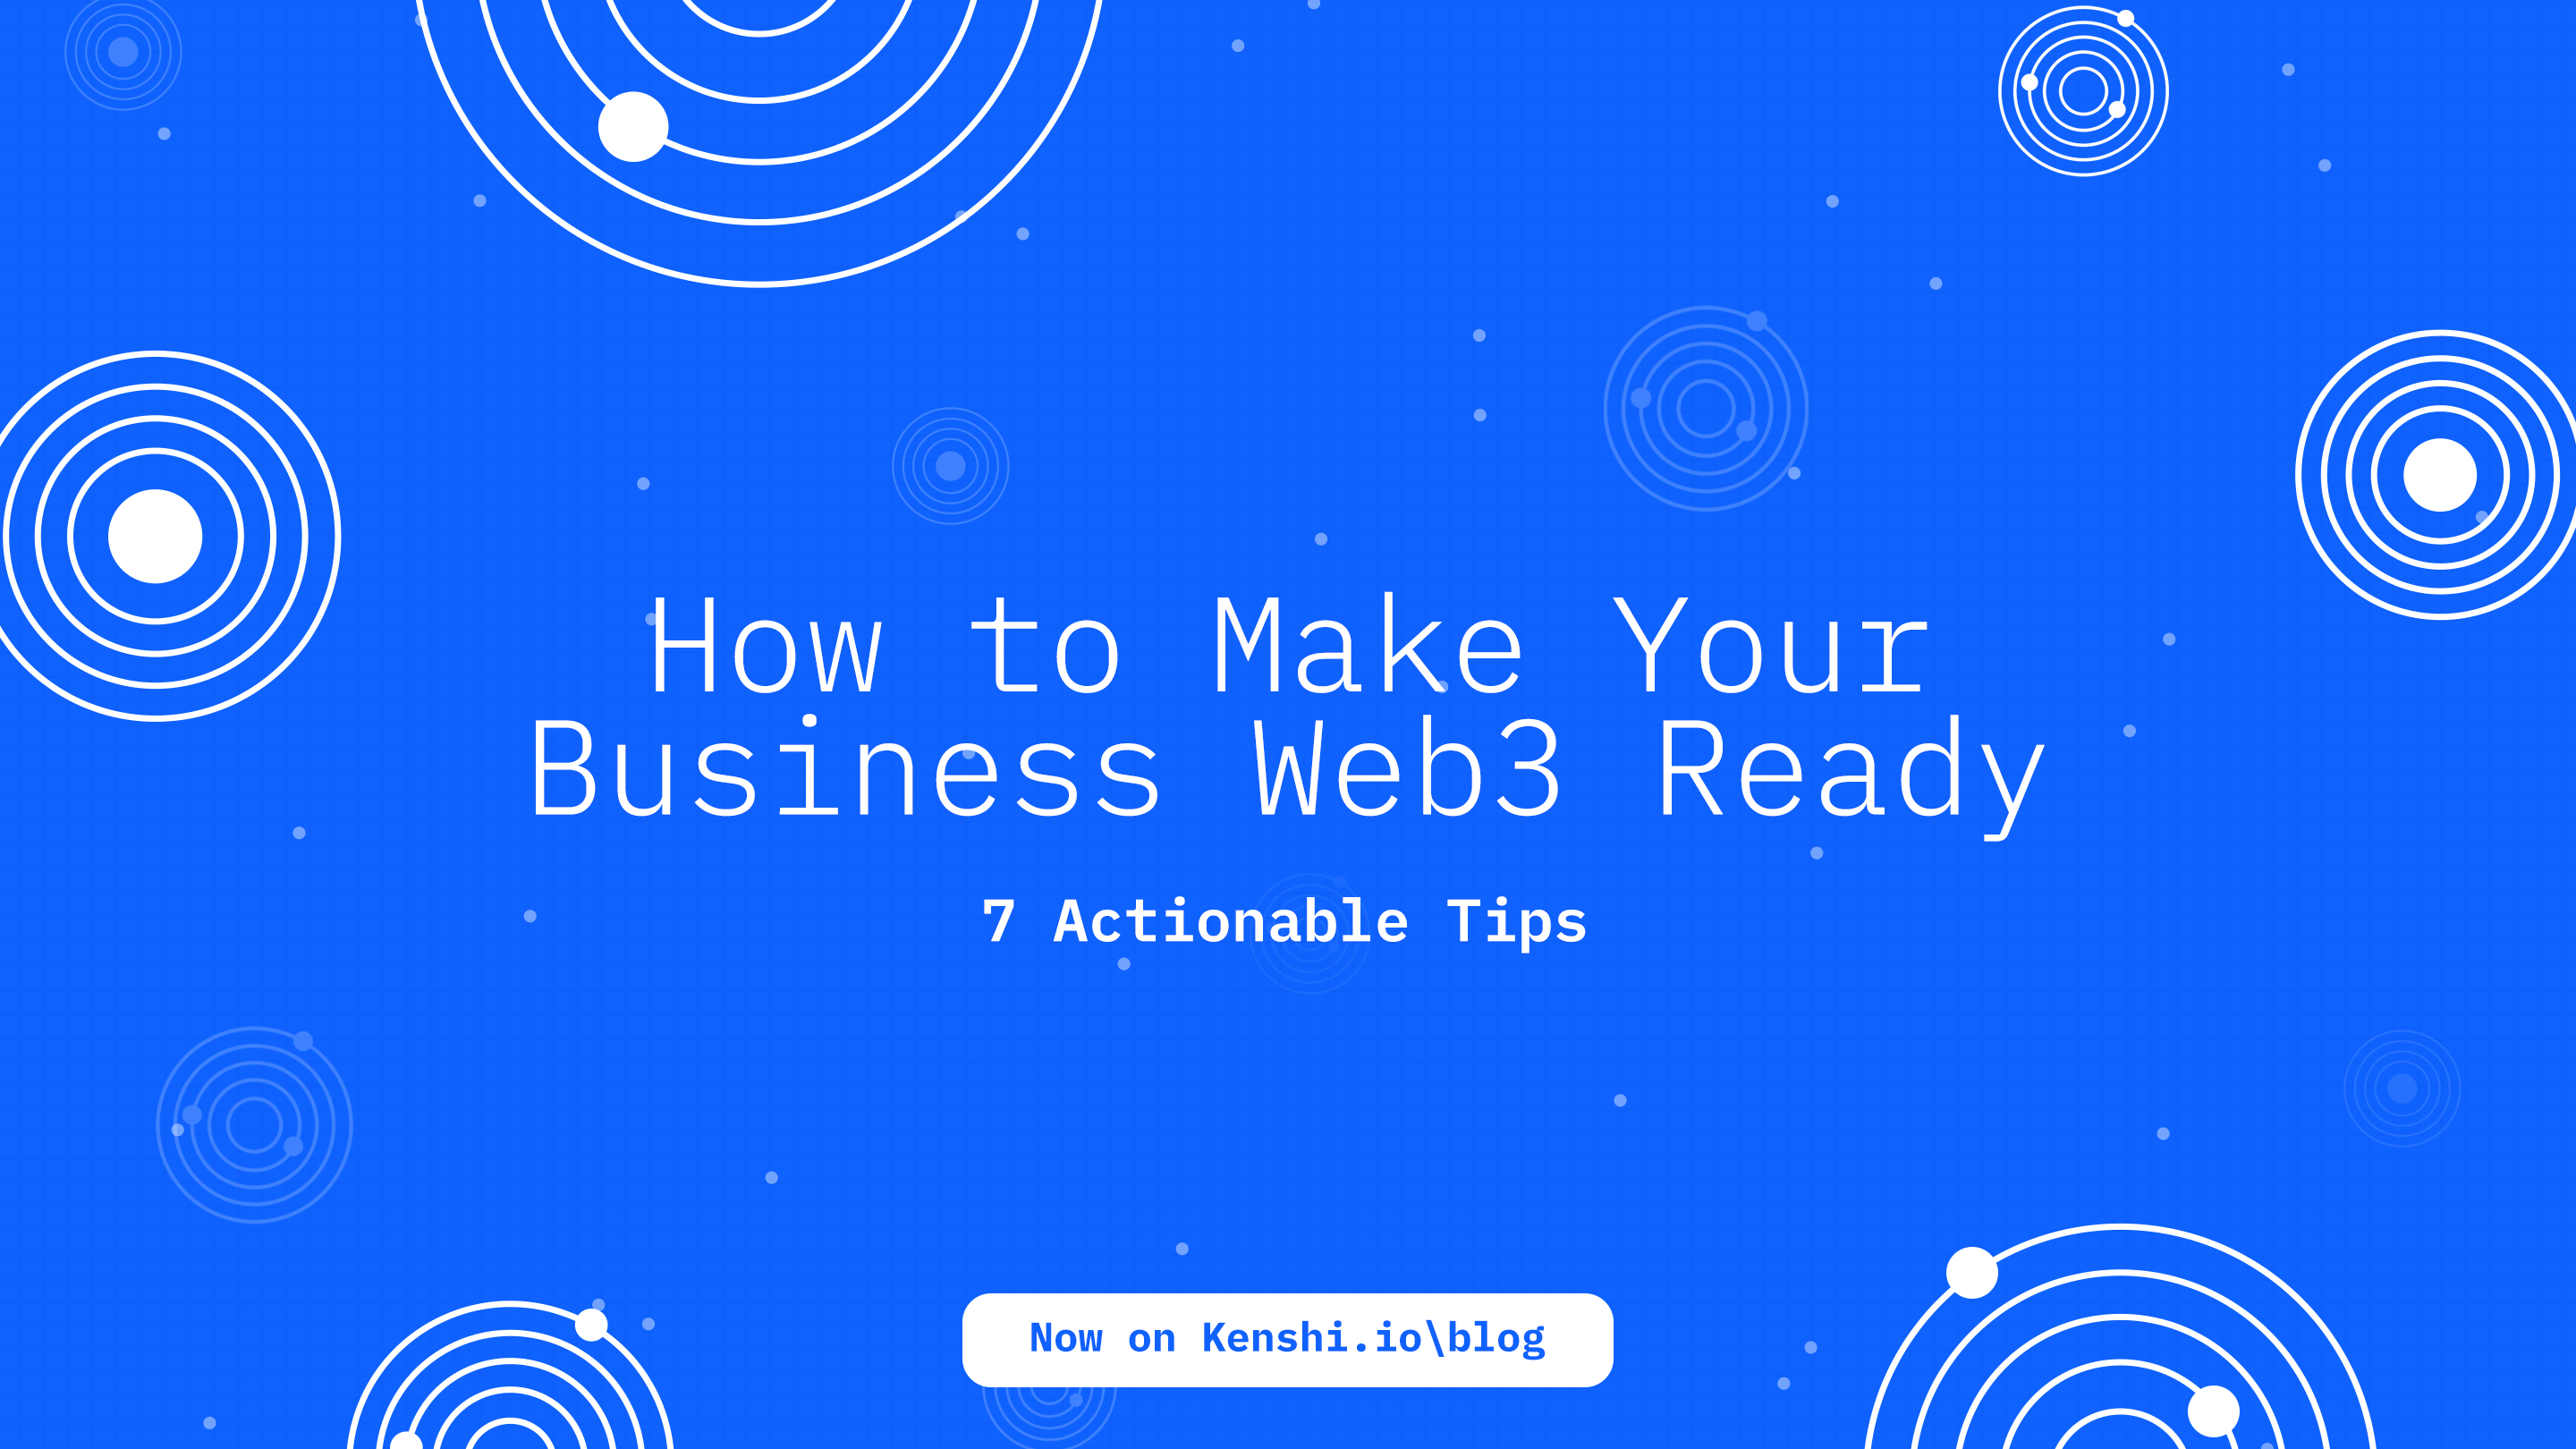 How to Make Your Business Web3 Ready: 7 Actionable Tips